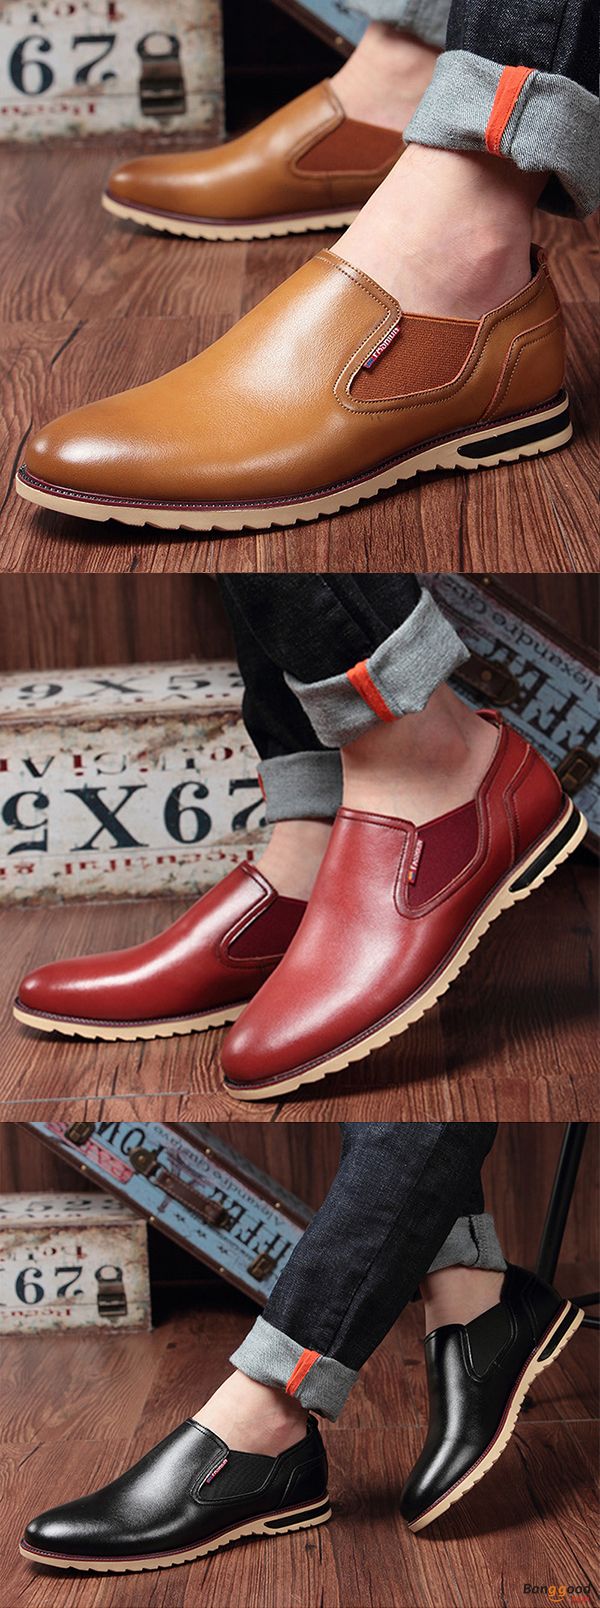 US$43.89 + Free shipping. Men Shoes, Leather Shoes, Slip On Shoes, Casual Style,...